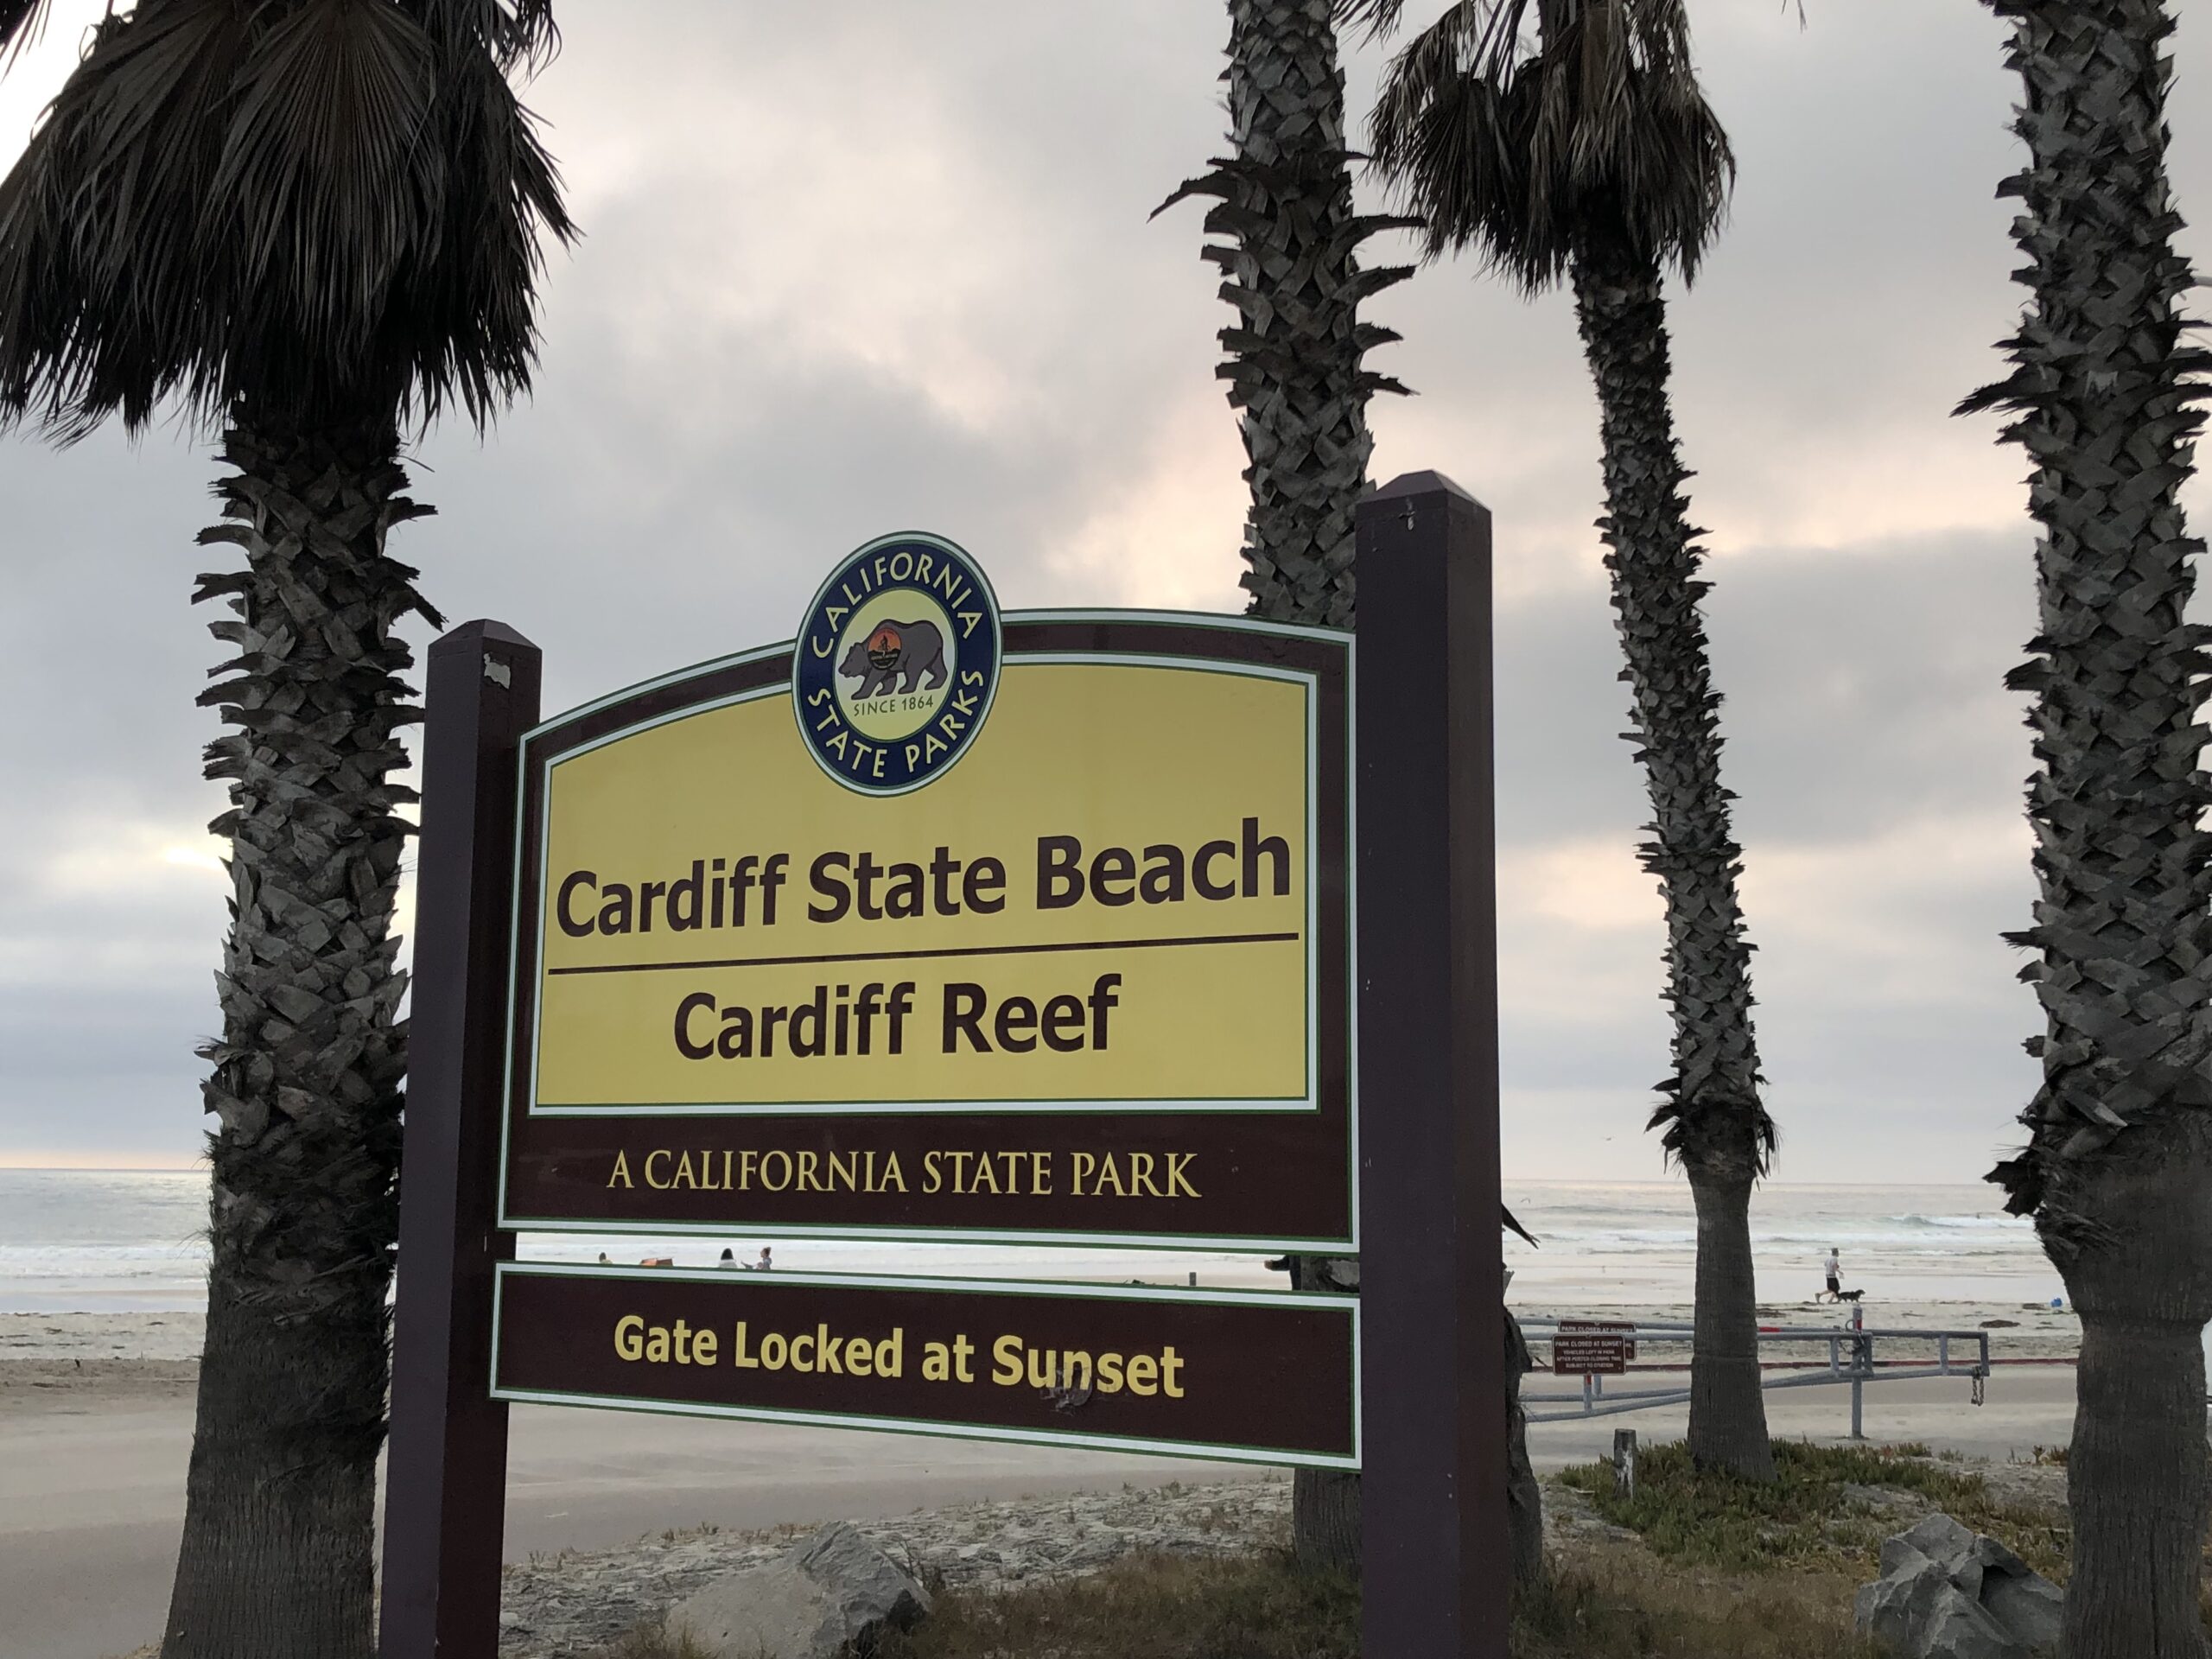 FREE LIVE Cardiff Reef Beach Surf Cameras And Cardiff Reef Surf Reports